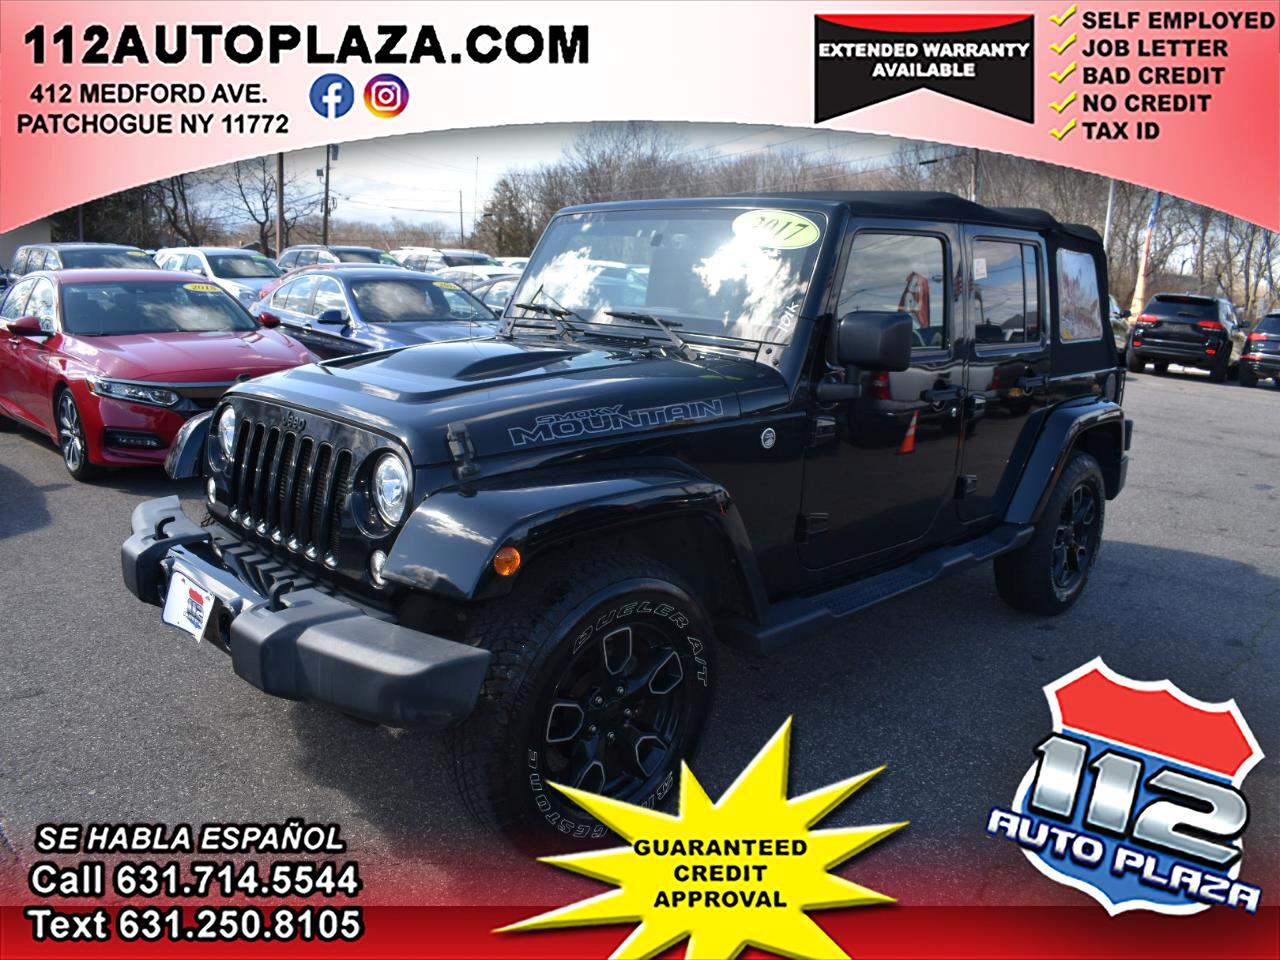 Used 2017 Jeep Wrangler Unlimited Smoky Mountain 4x4 *Ltd Avail* for Sale  in Patchogue NY 11772 112 Auto Plaza